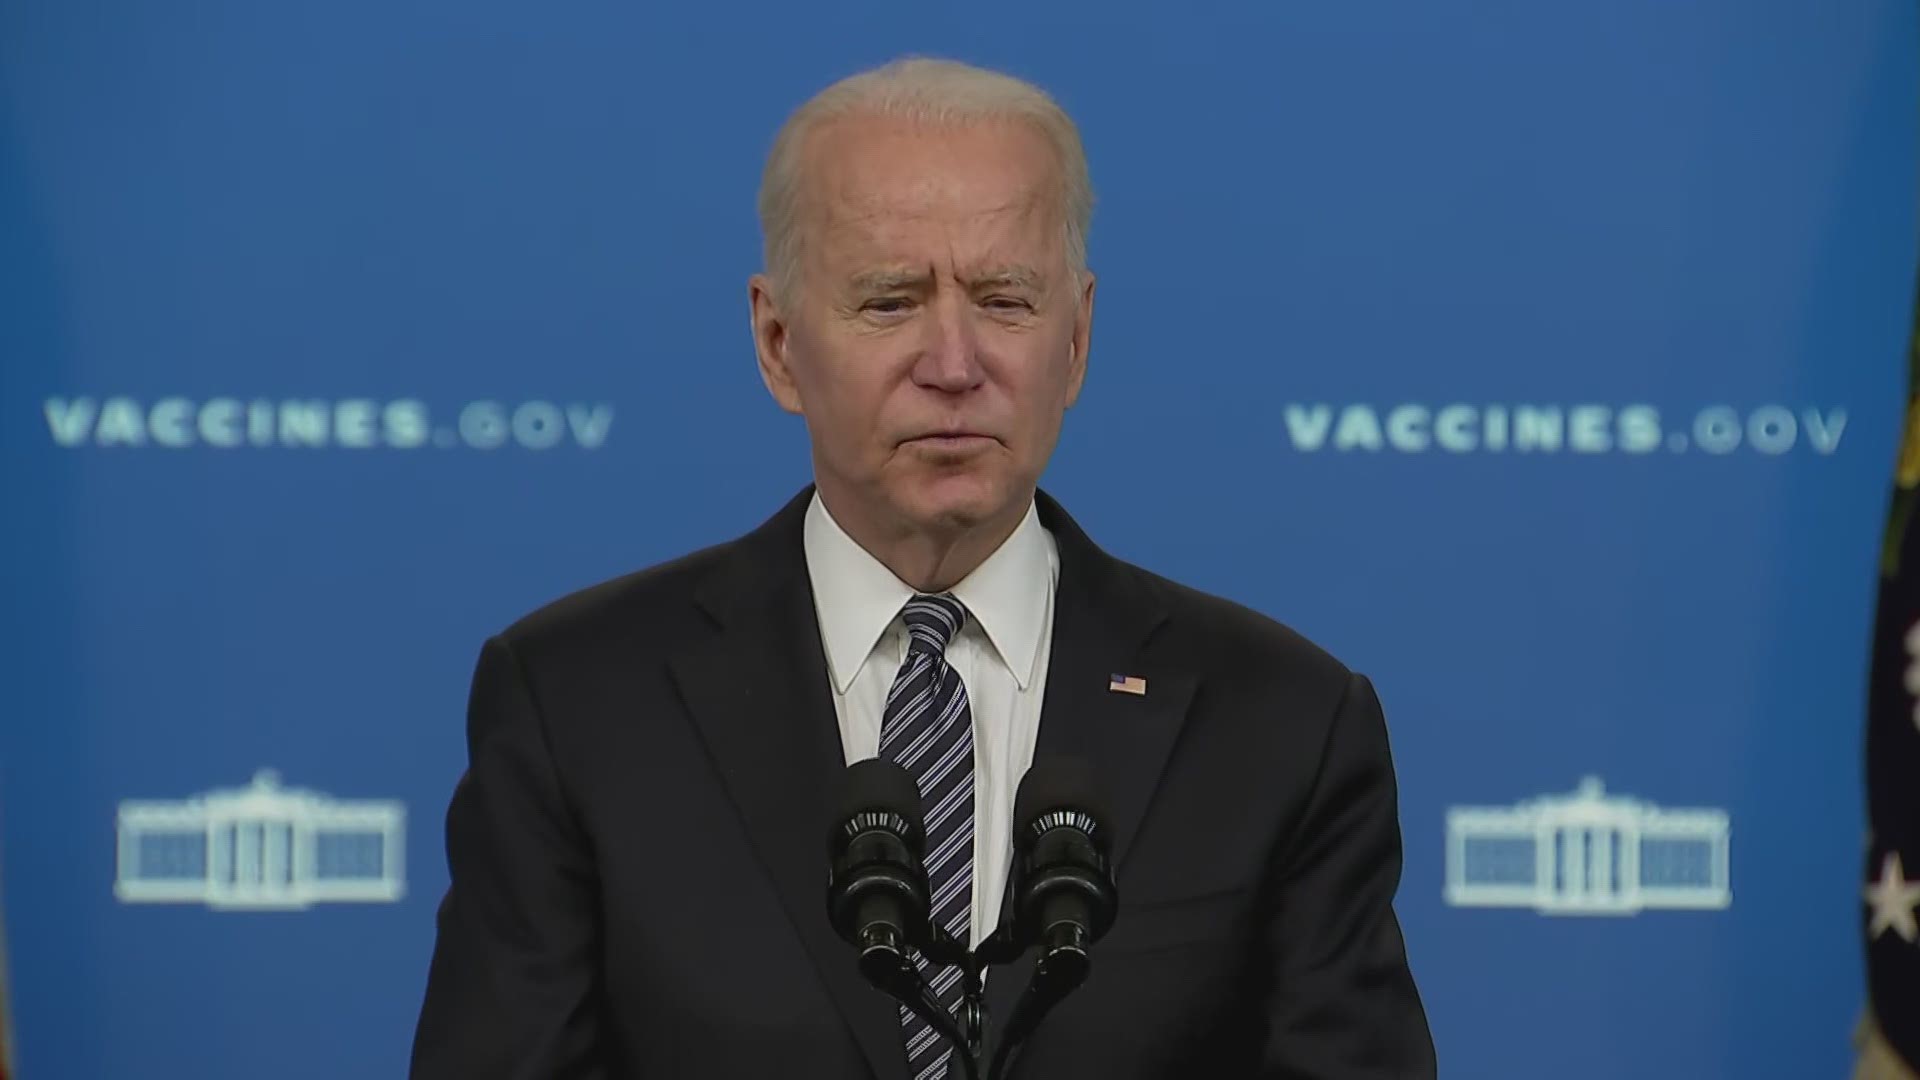 A federal advisory committee voted Wednesday to endorse Pfizer's COVID-19 vaccine for 12- to 15-year-olds. President Biden announced the encouraging vaccine news.